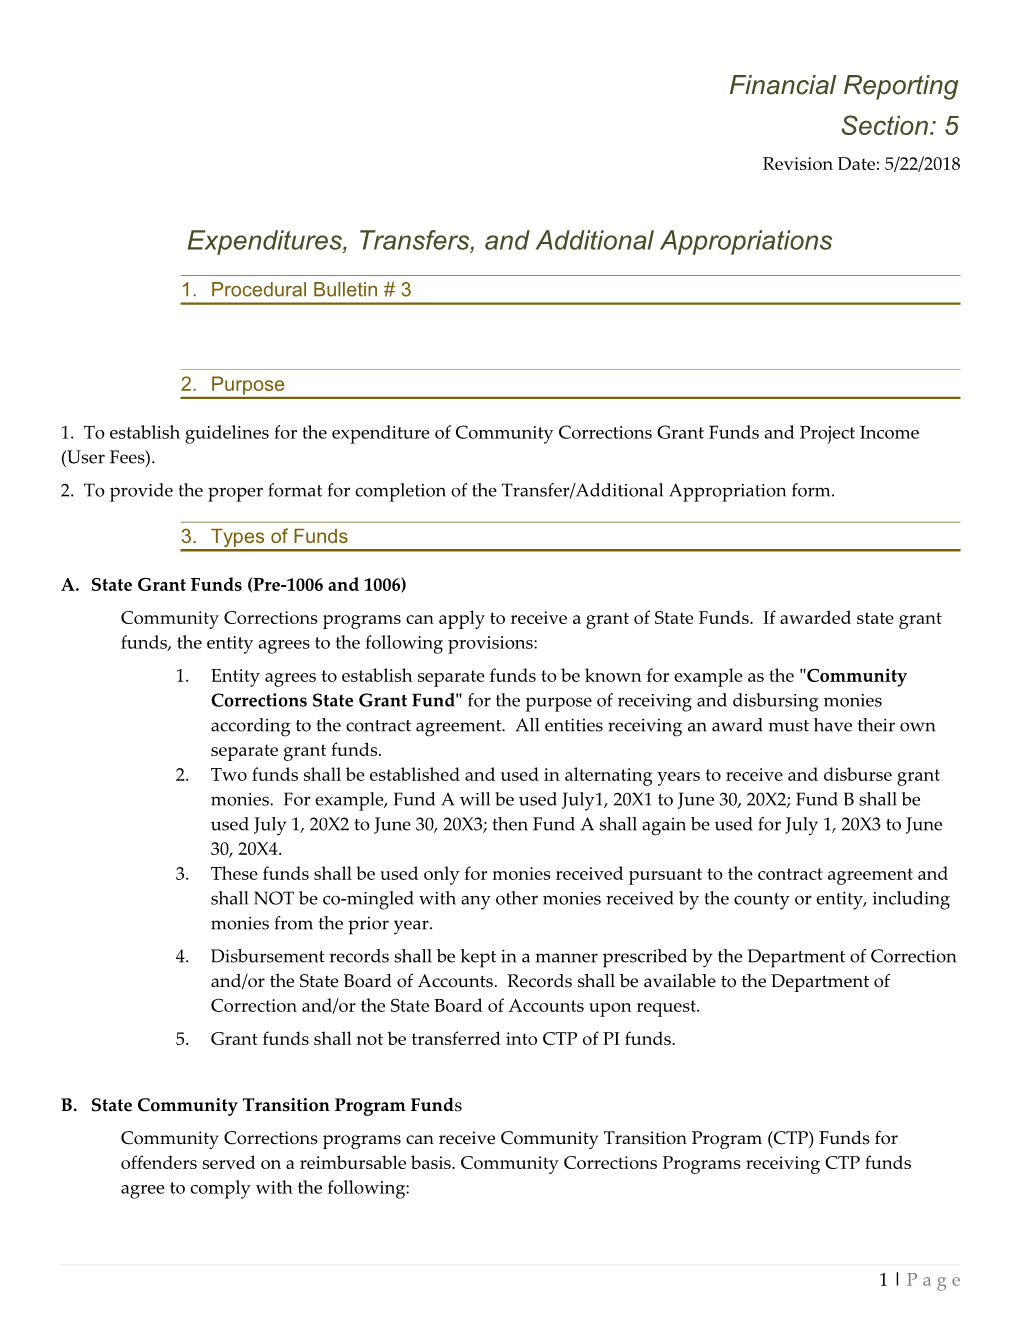 Expenditures, Transfers, and Additional Appropriations